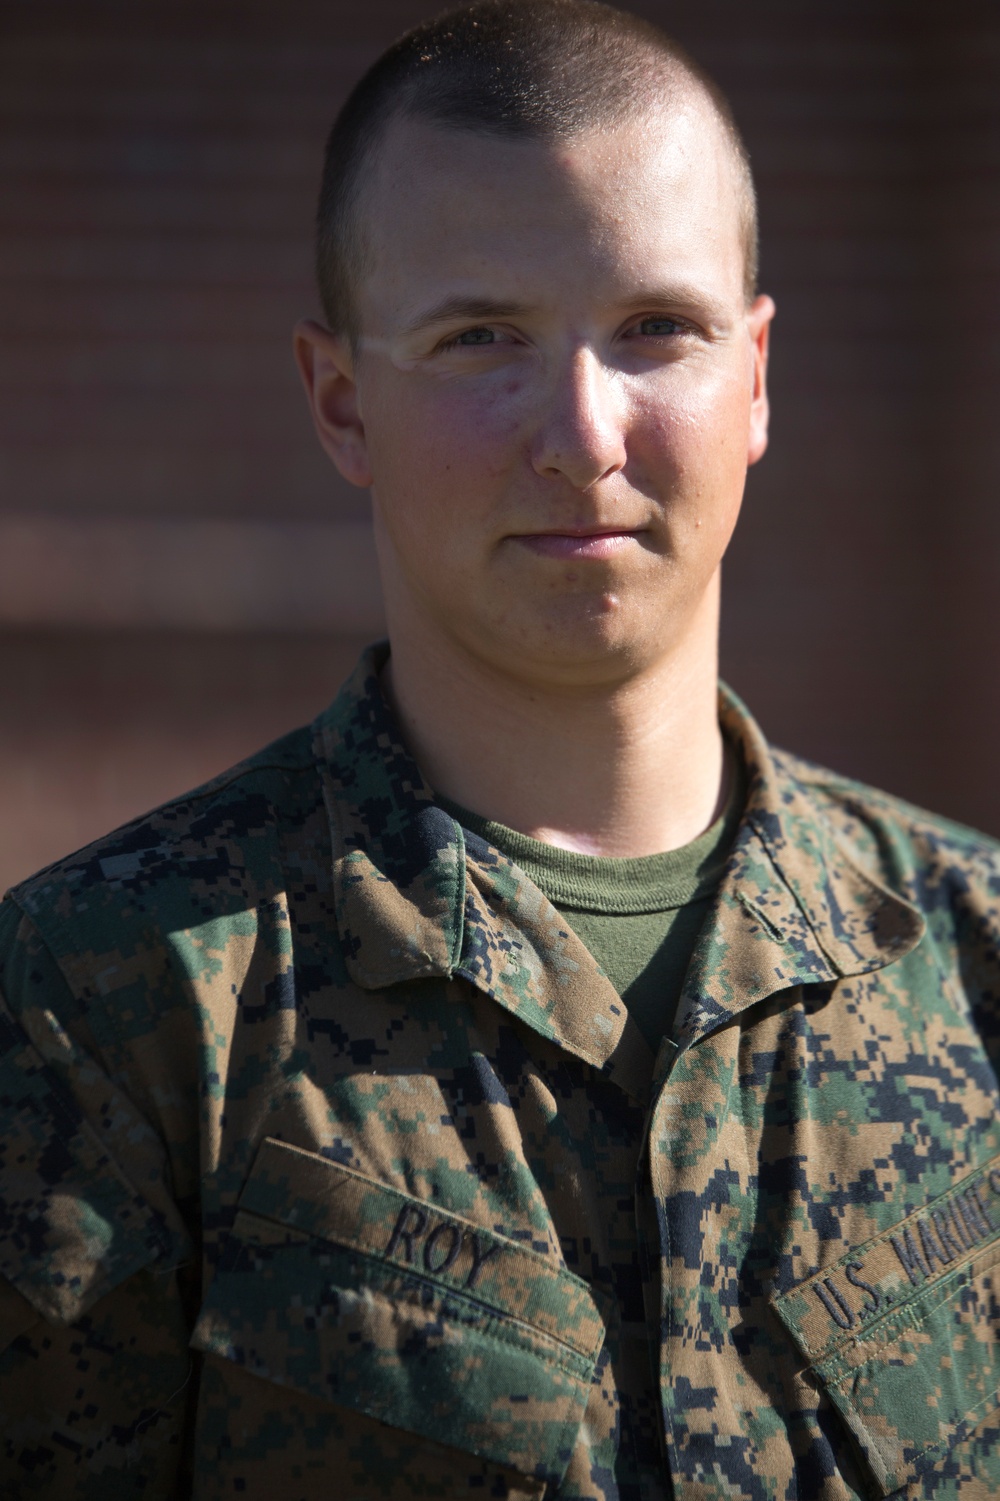 Barre, Vt., native training at Parris Island to become U.S. Marine